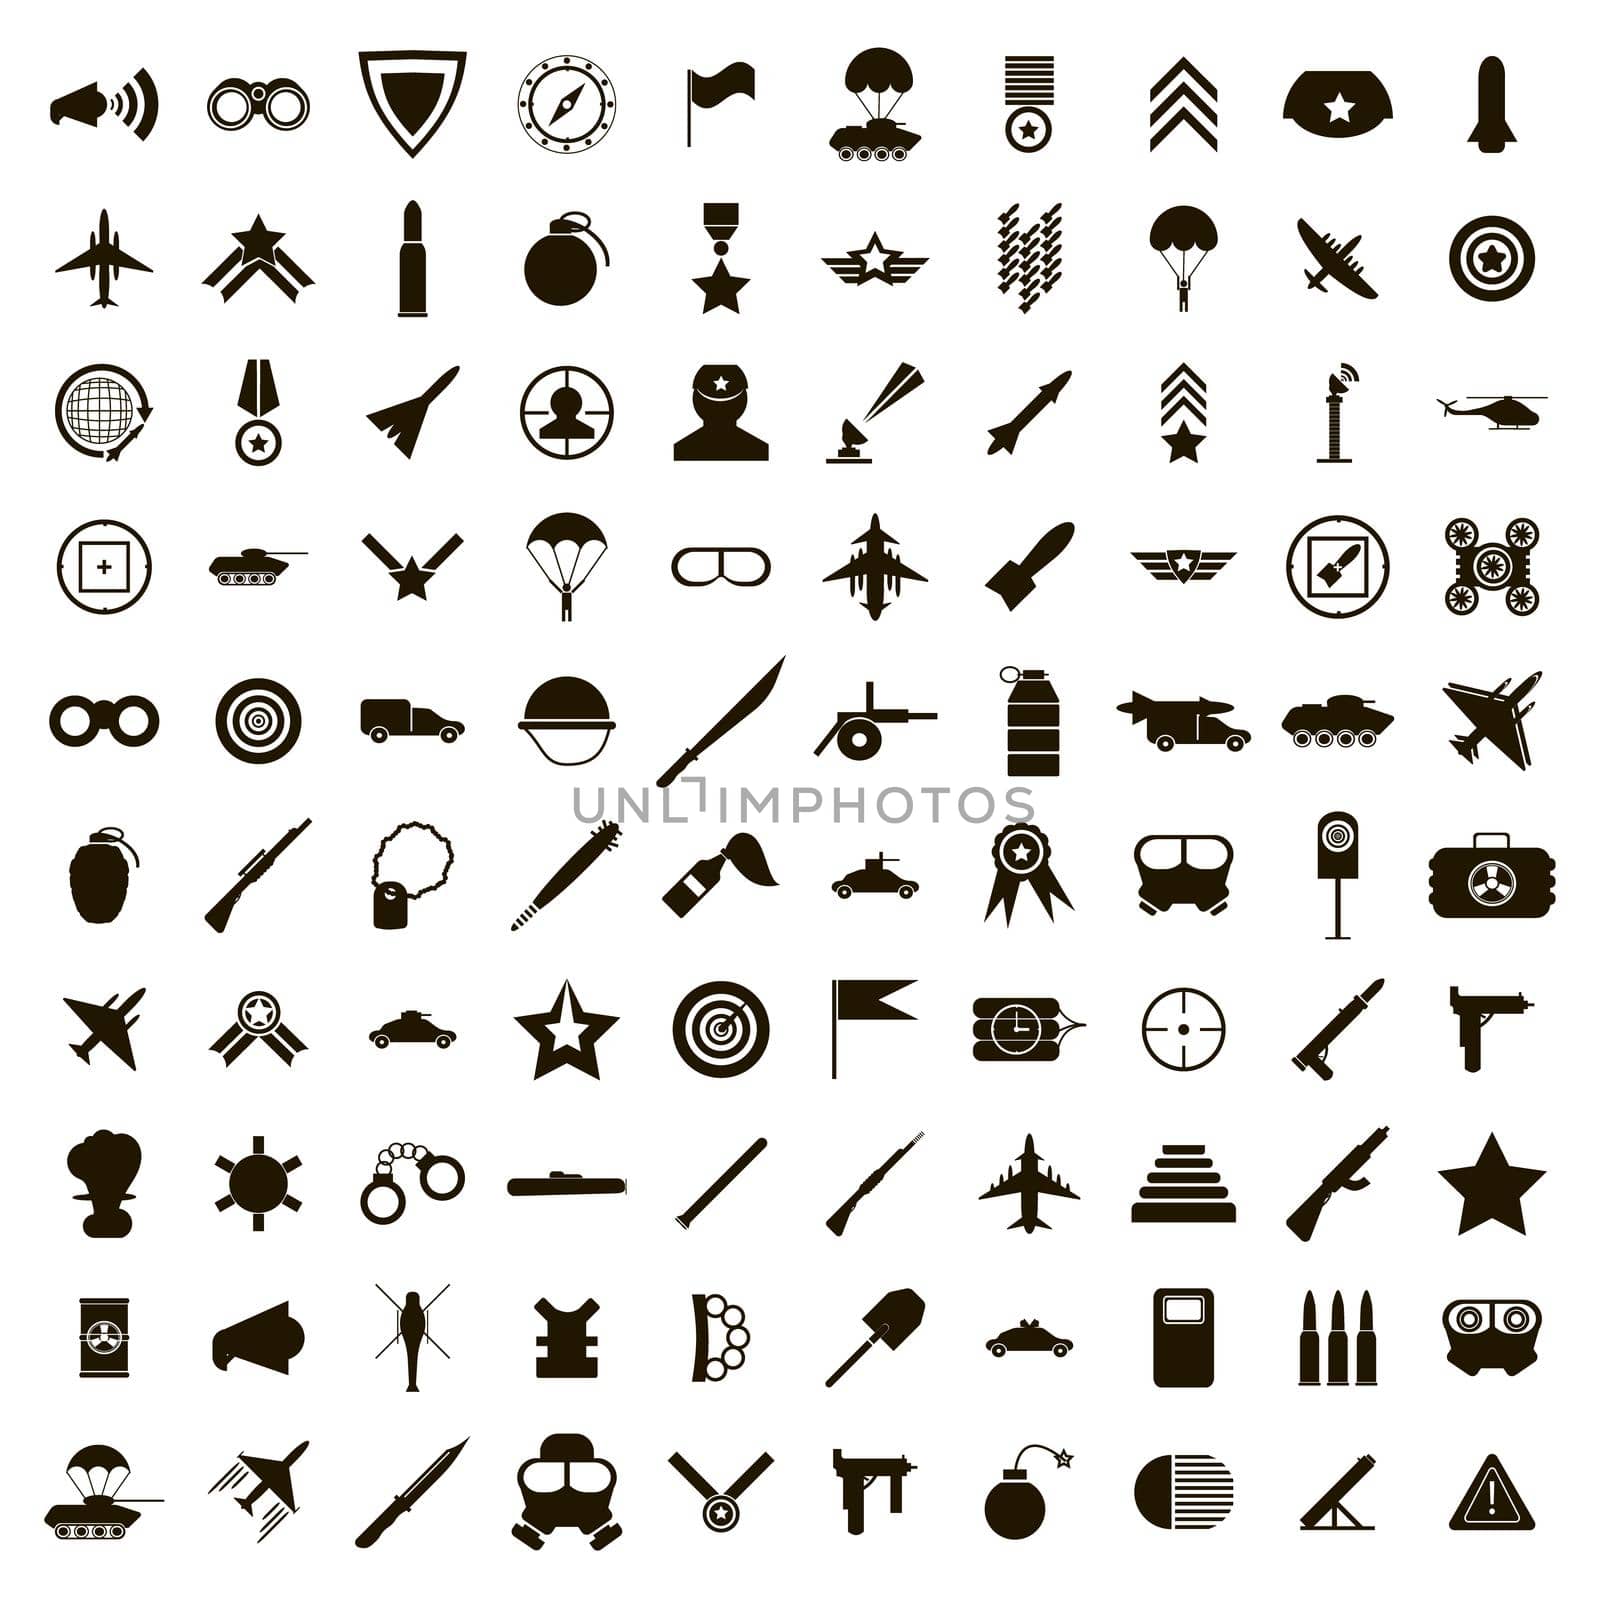 100 military icons set in simple style on a white background